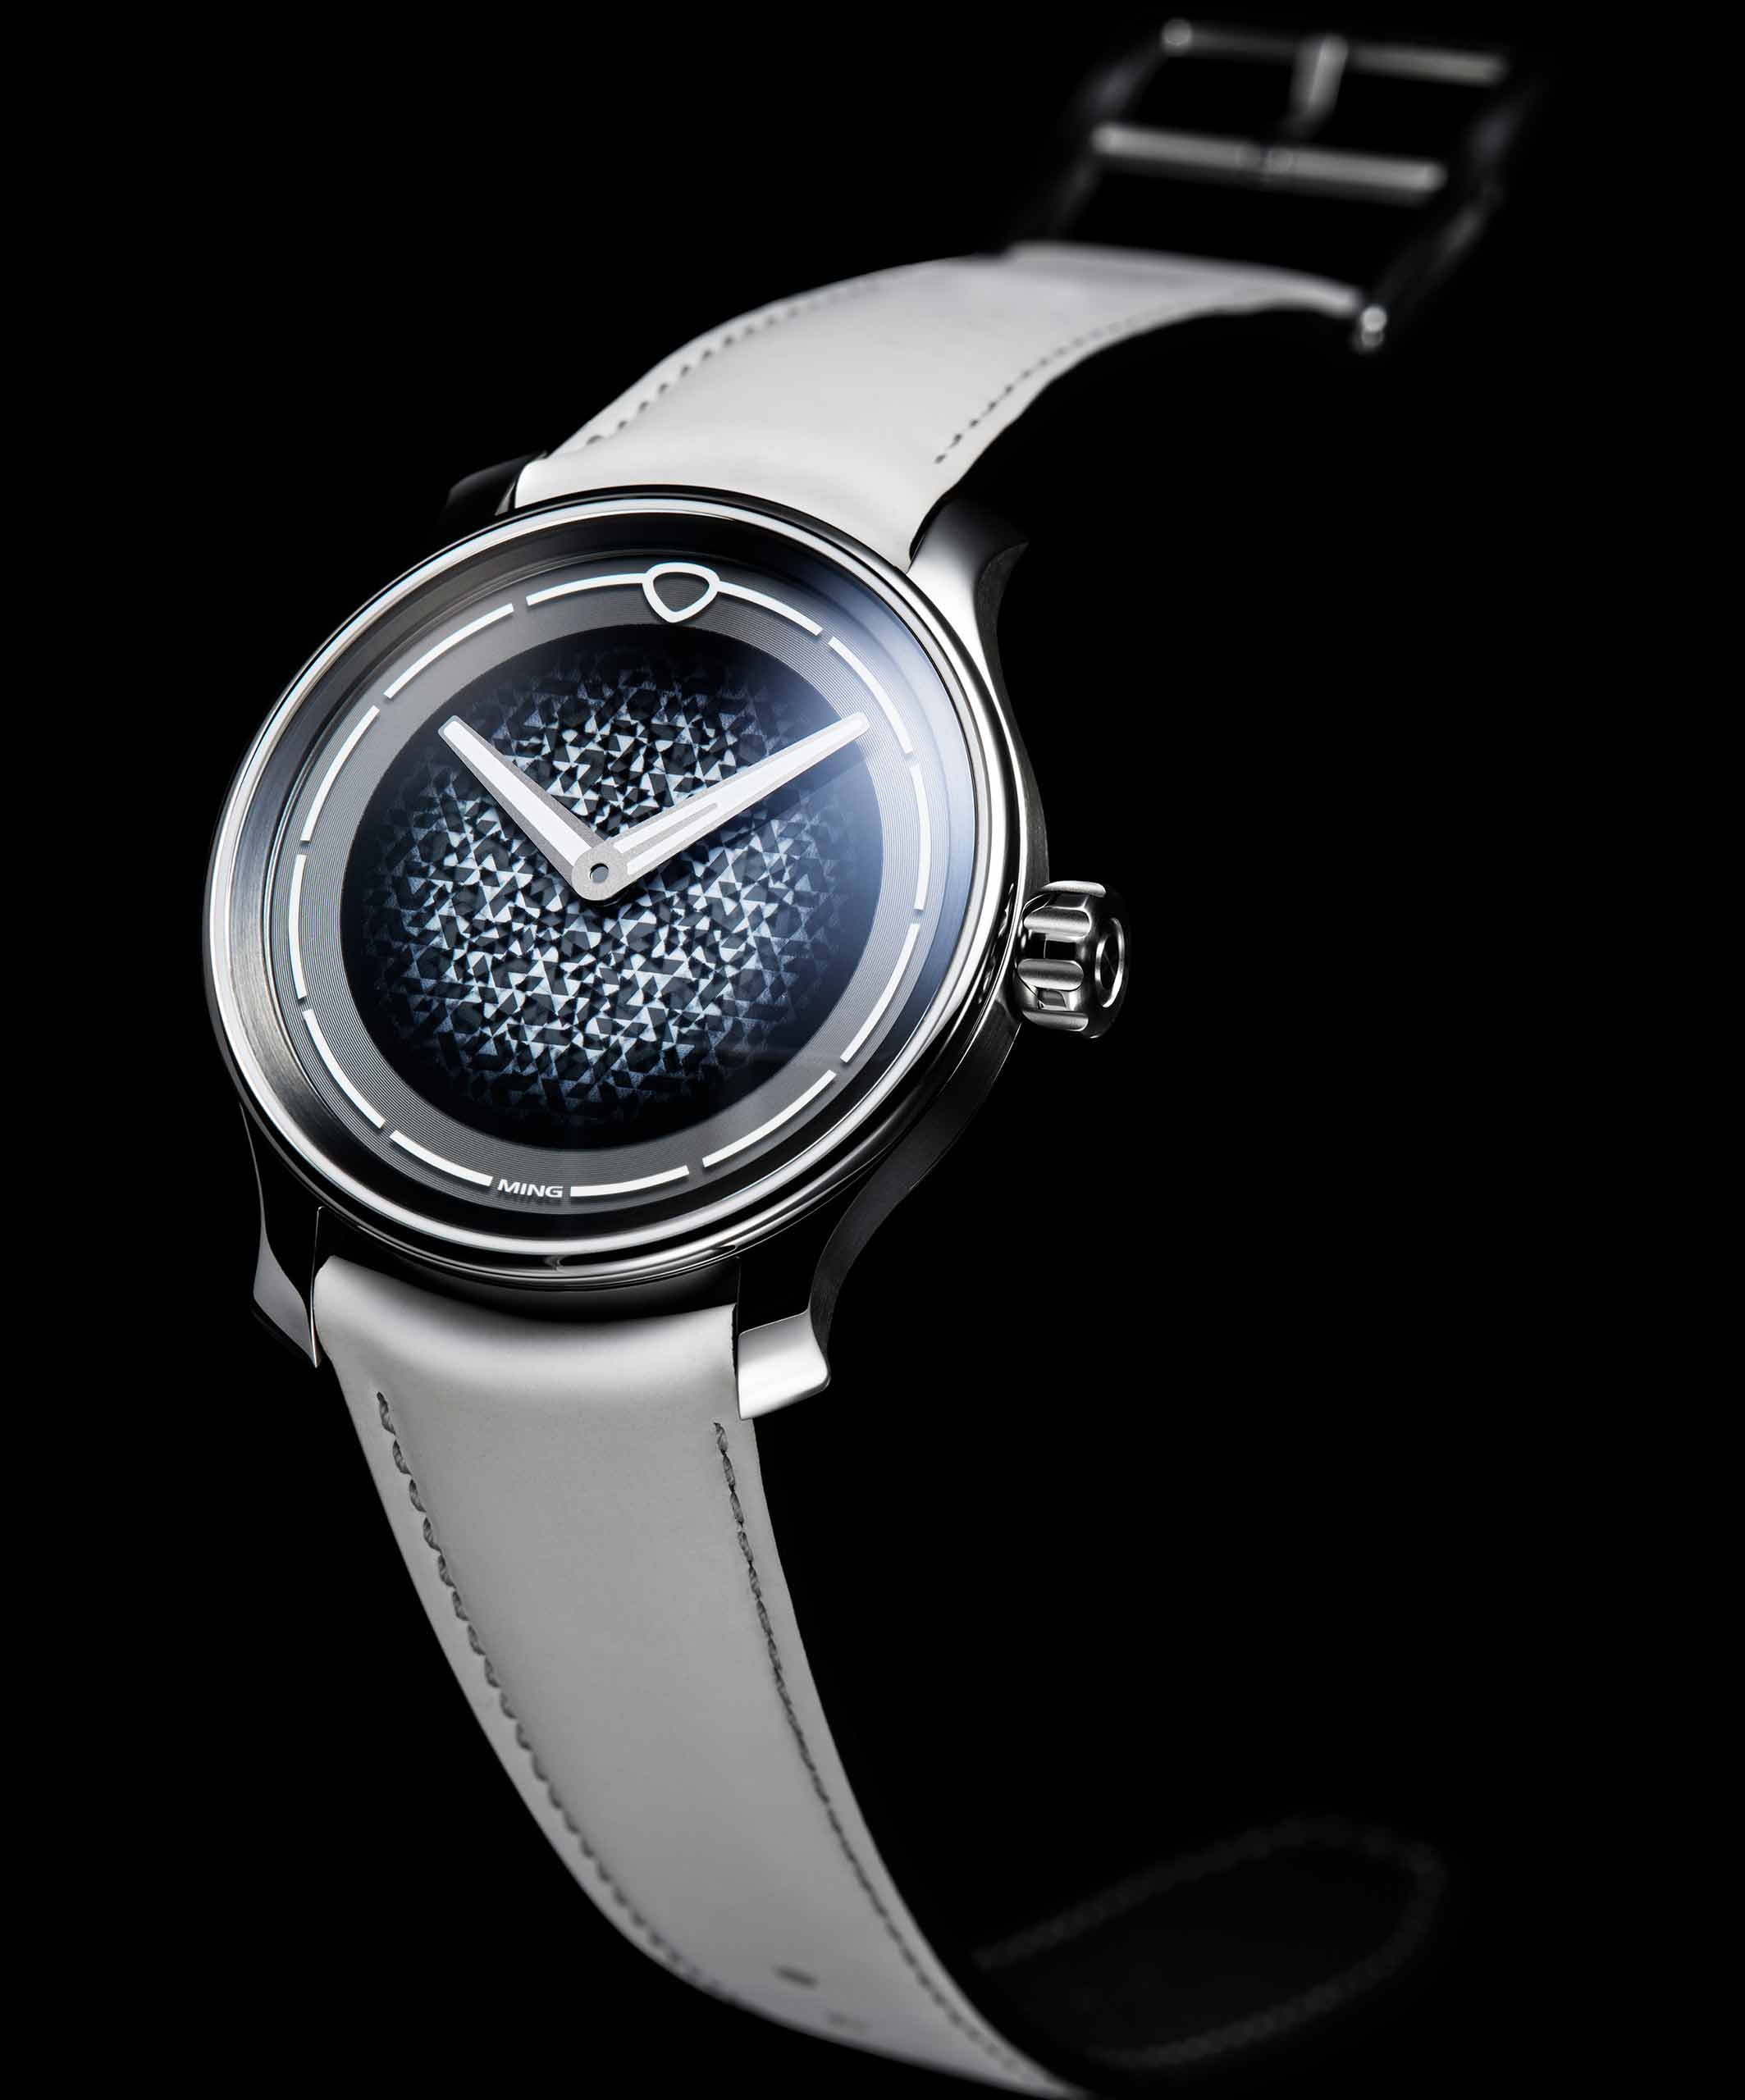 Ming Celebrates their Fifth Anniversary with a New Take on the Mosaic Dial, the 37.07